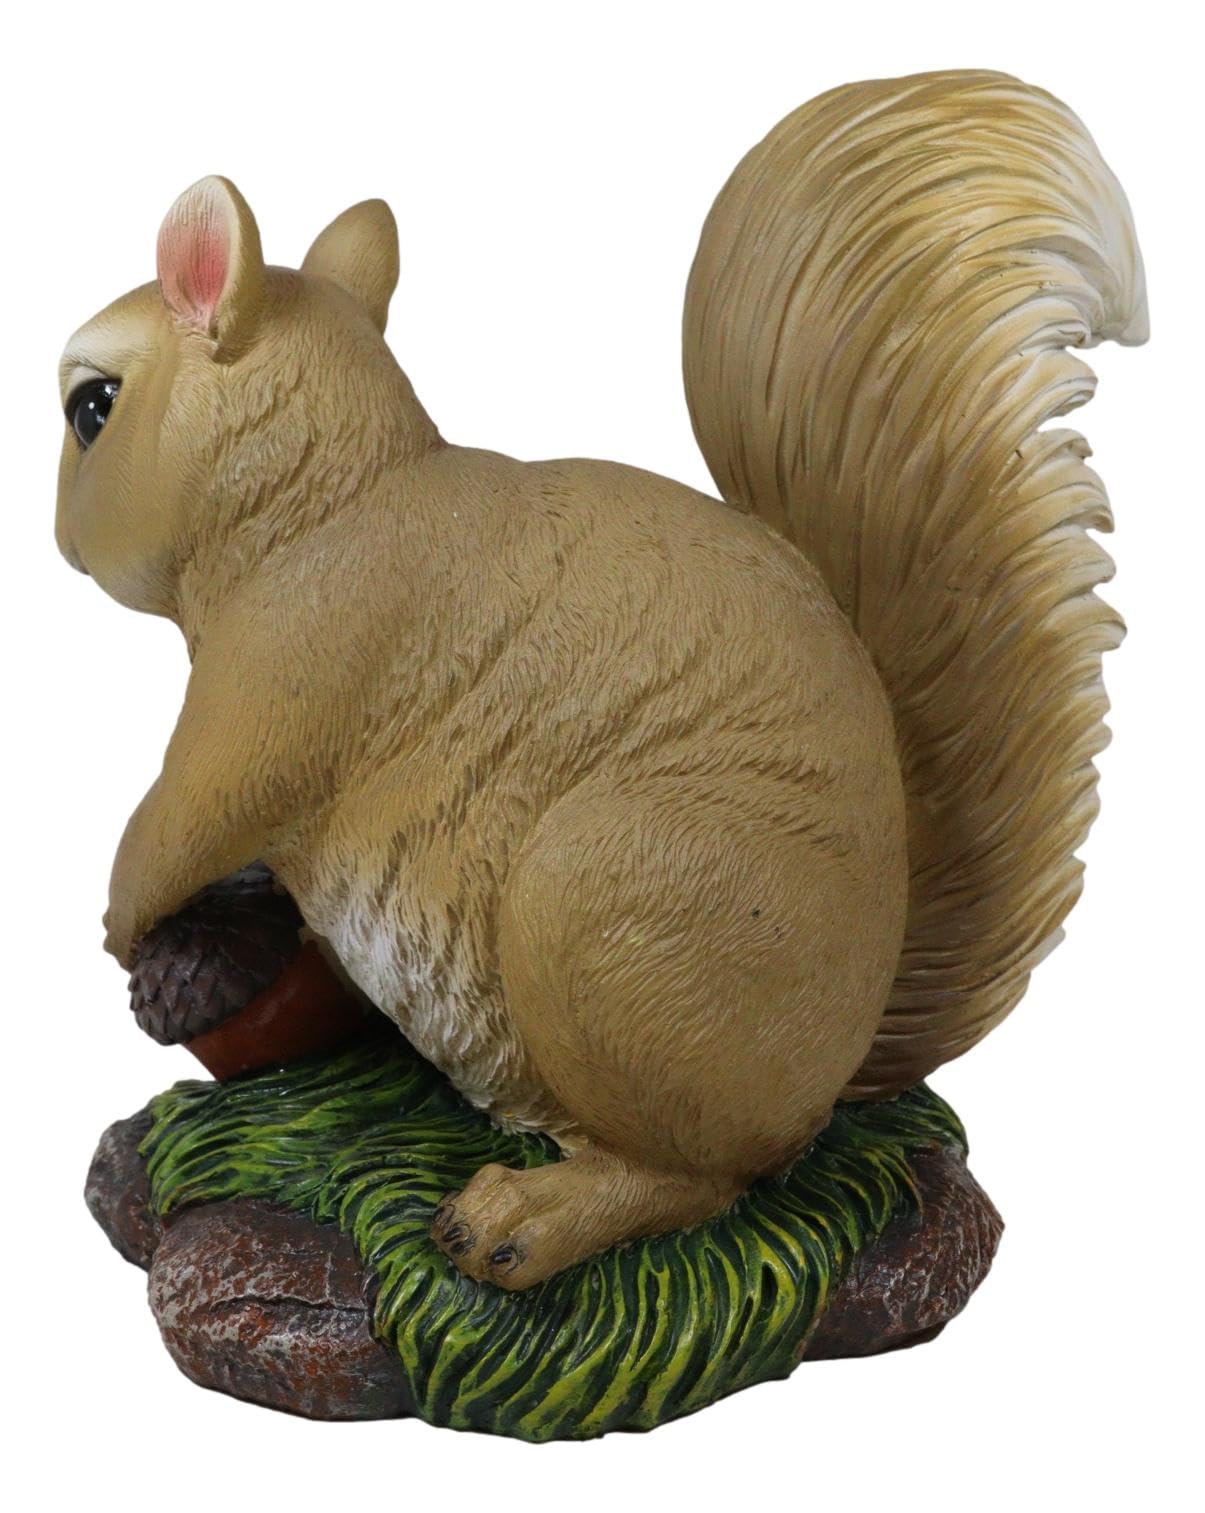 Ebros Gift Large Rude Squirrel Pointing Middle Finger with Acorn Nutty Welcome Guest Greeter Statue 10" Tall Whimsical Woodlands Funny Animal Squirrels Chipmunks Flipping Off Home Decor Figurine